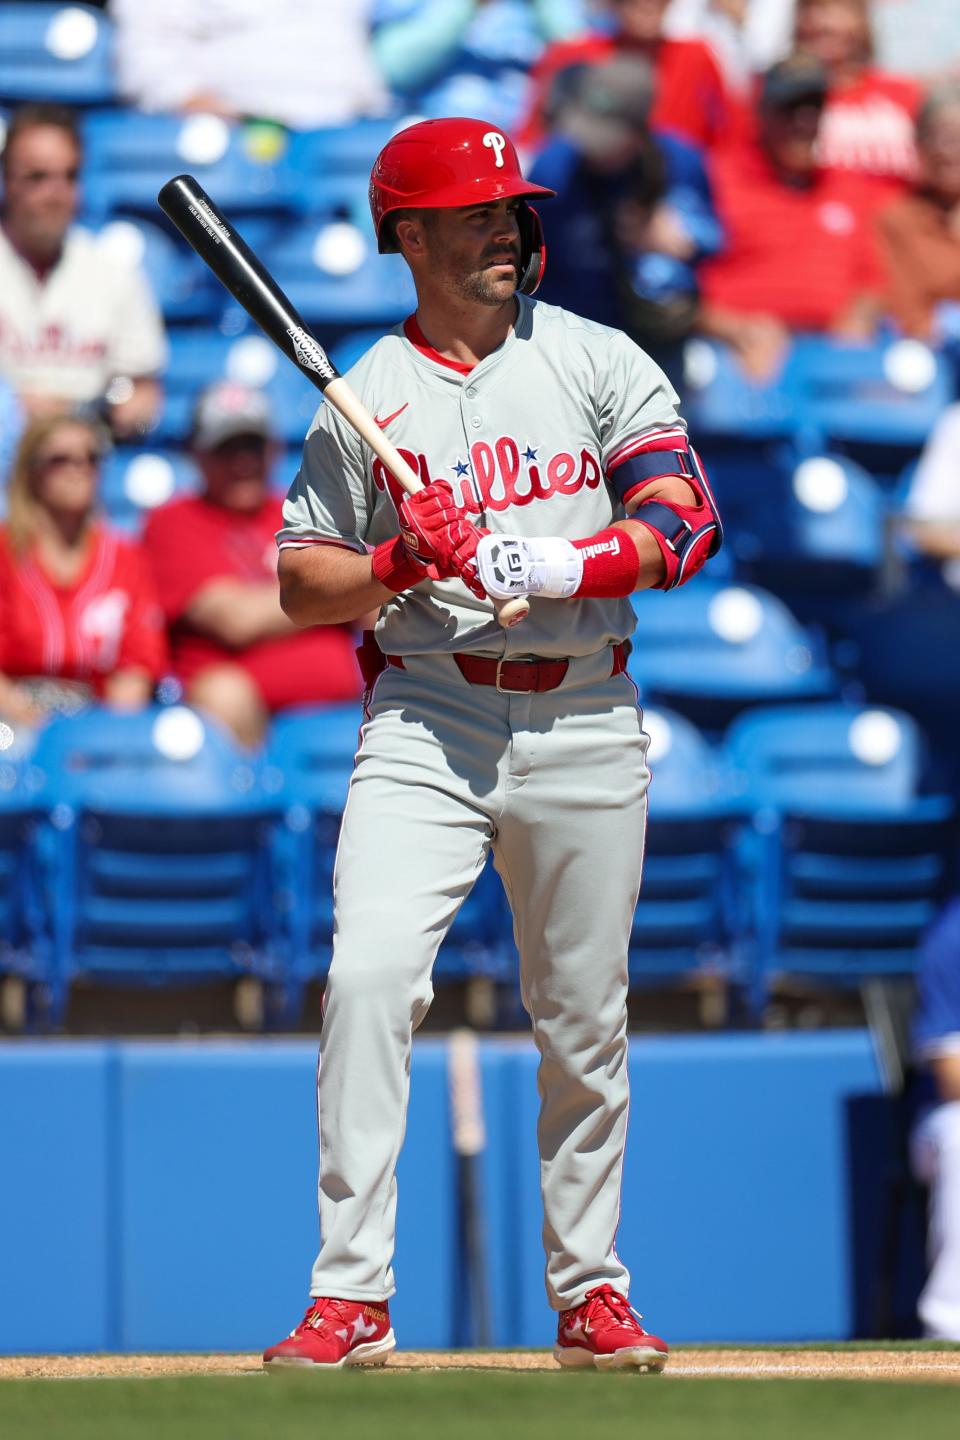 Philadelphia Phillies second baseman Whit Merrifield (9) looks on during an at bat against the Toronto Blue Jays in the first inning at TD Ballpark.